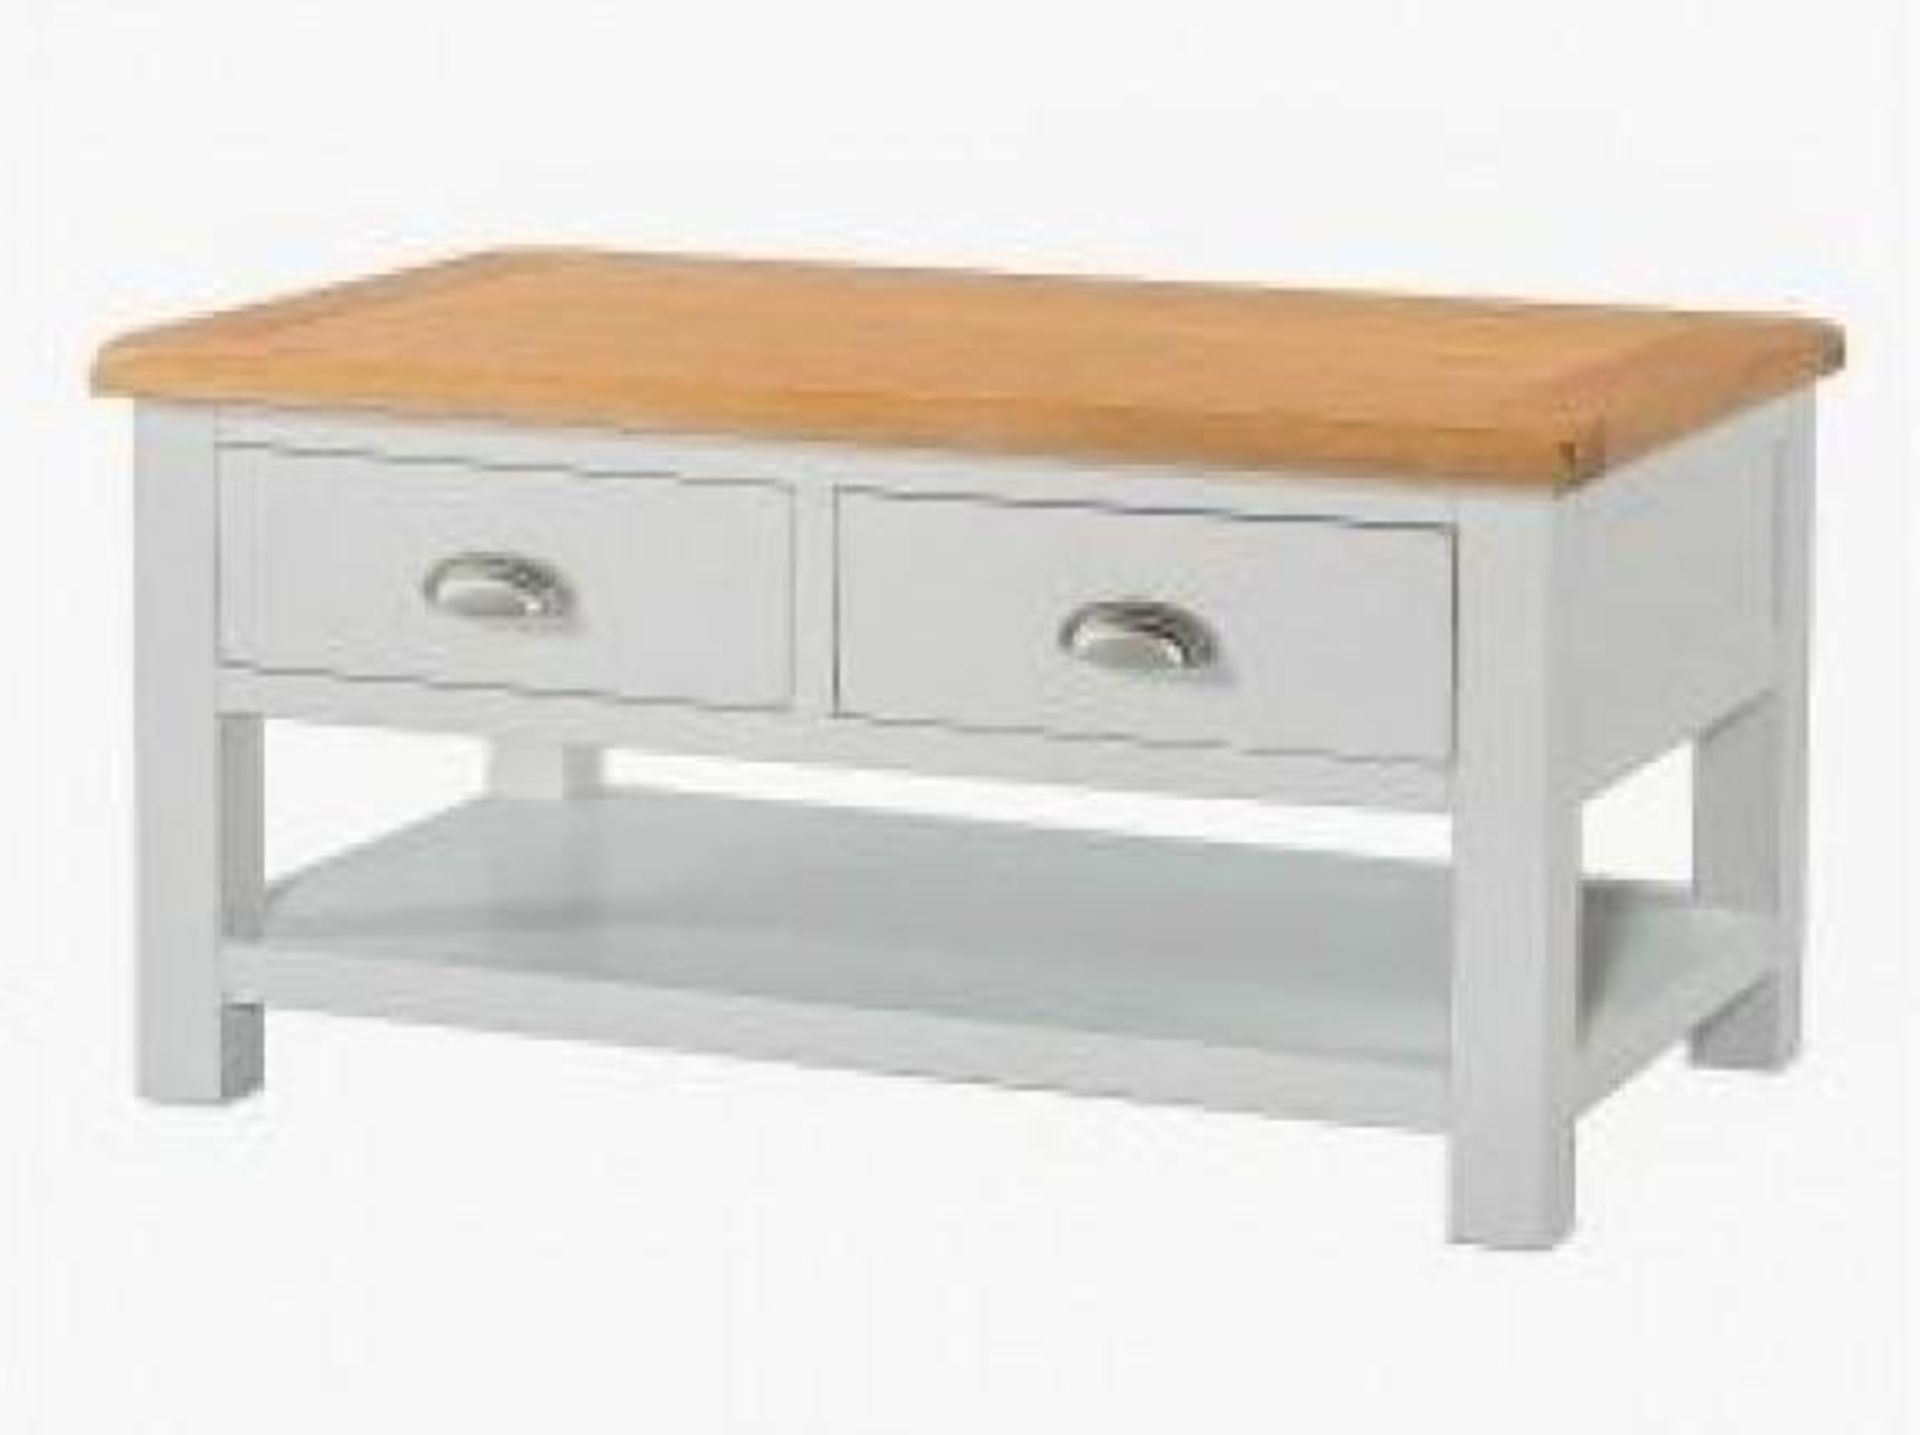 BRAND NEW & BOXED Clevedon coffee table